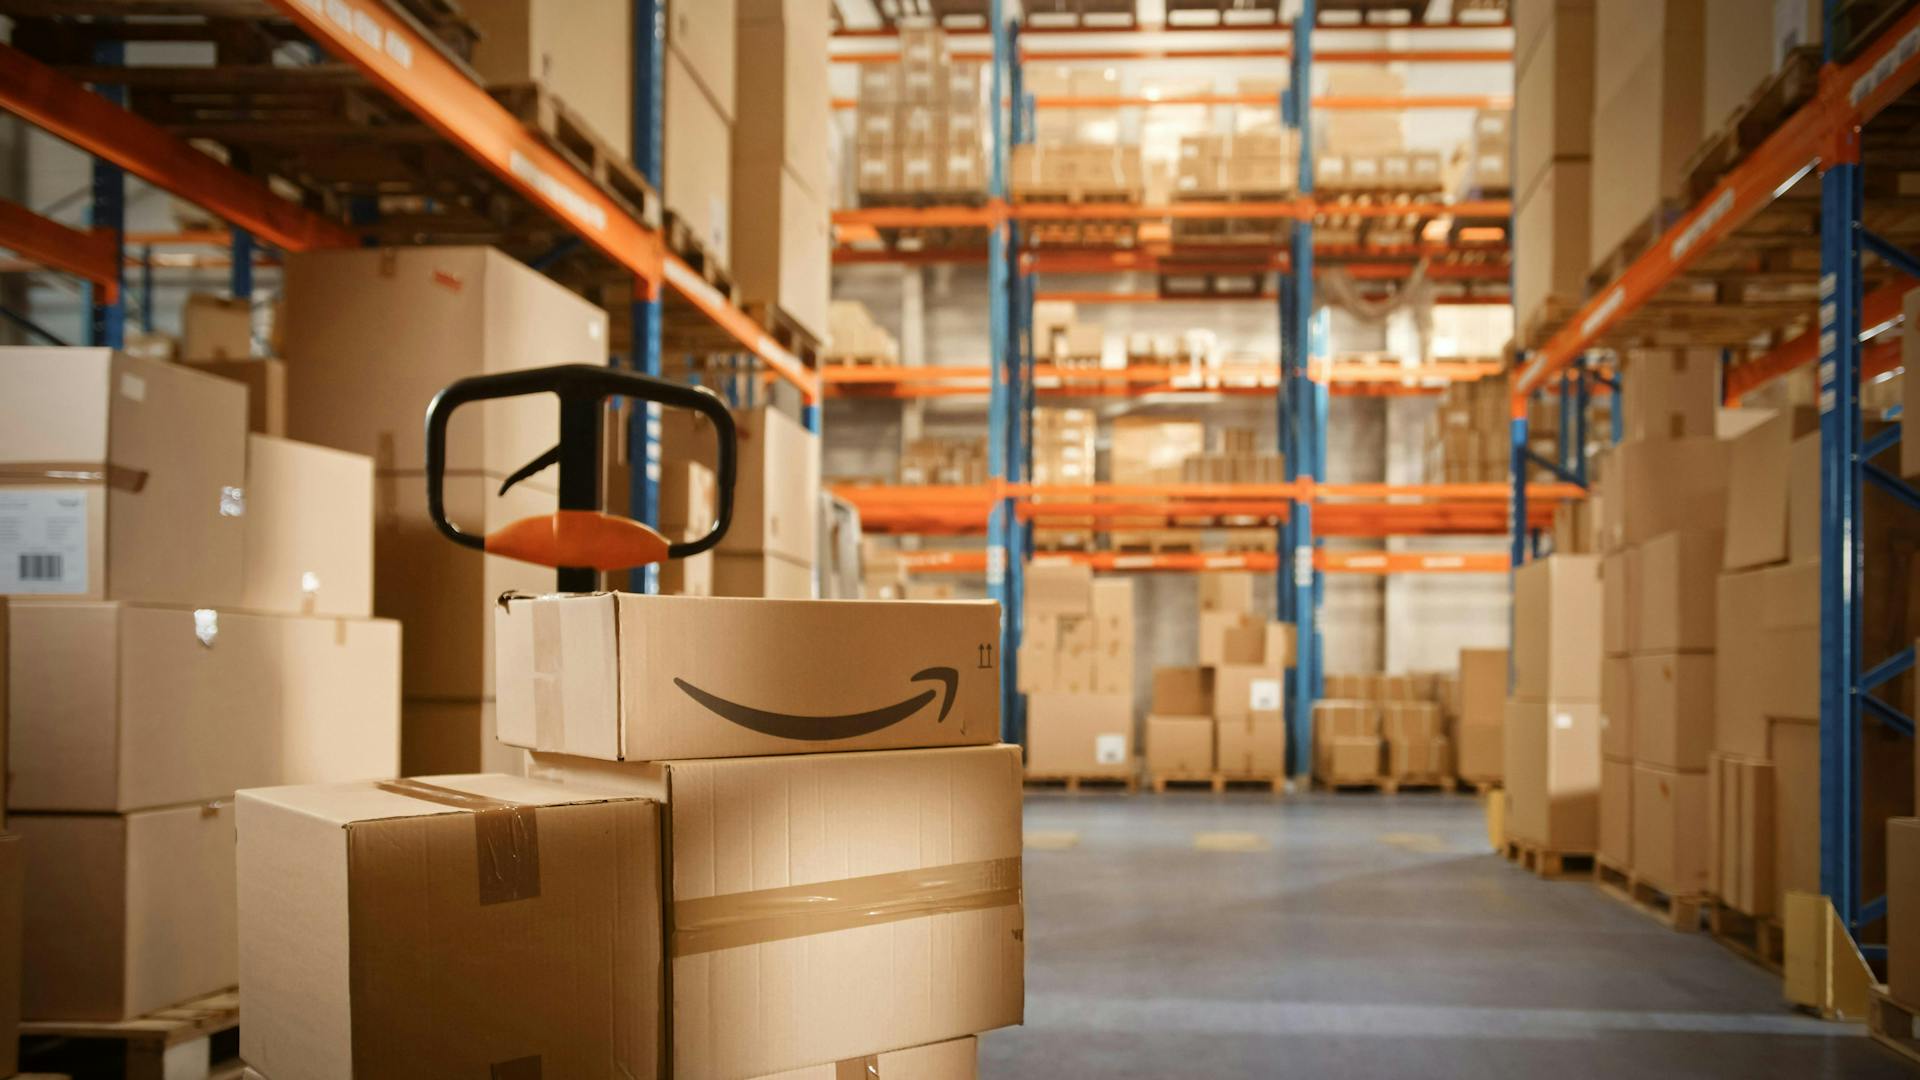 Amazon boxes piled up in a warehouse.